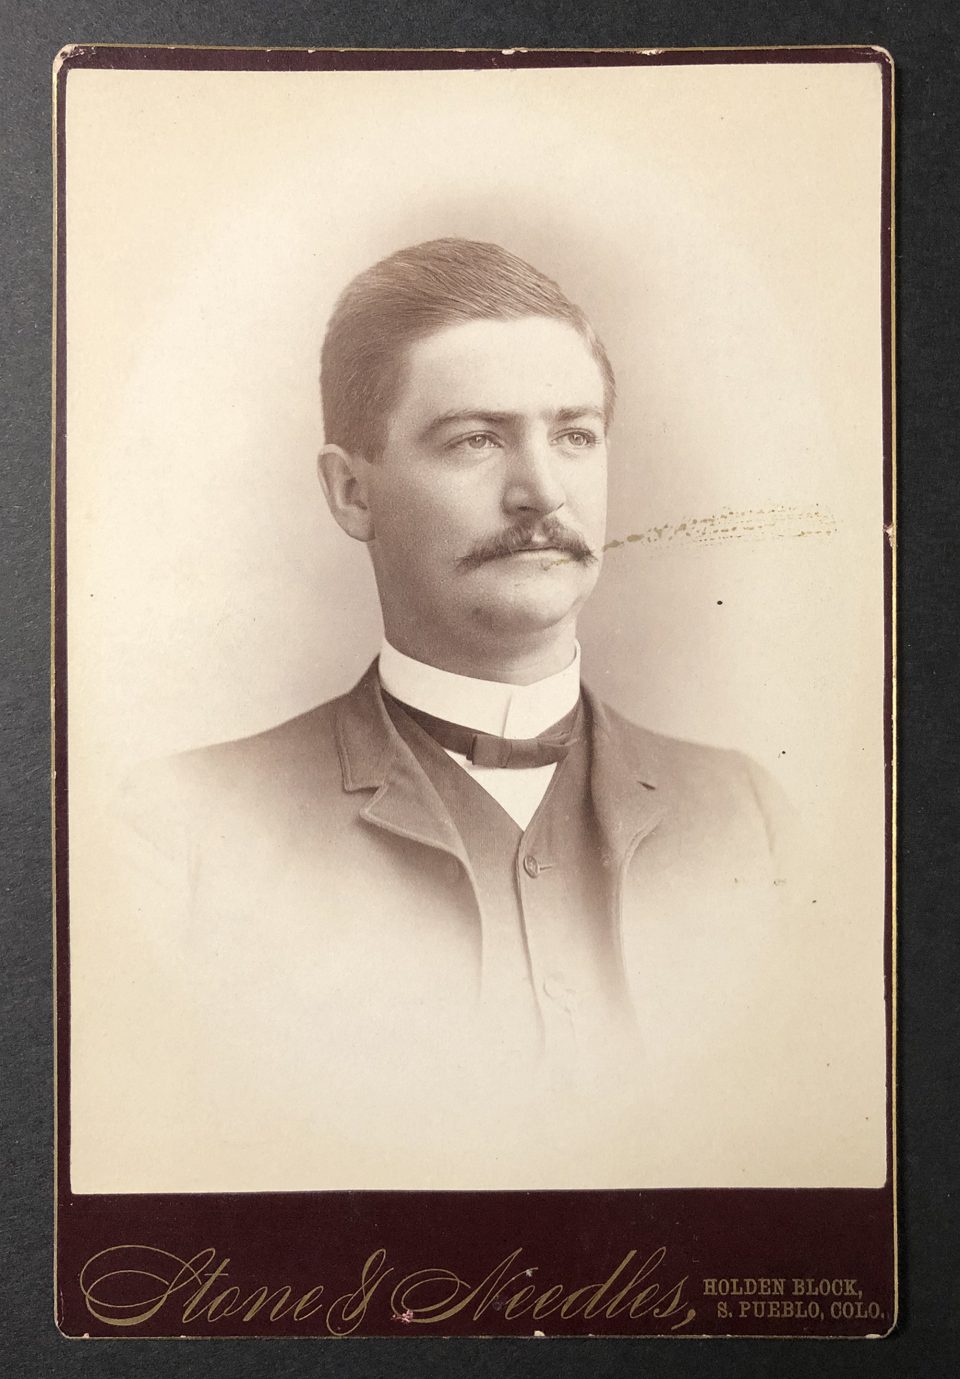 Cabinet card portrait of a well dressed gentleman with a mustache, photographed by the studio of Stone & Needles in South Pueblo,